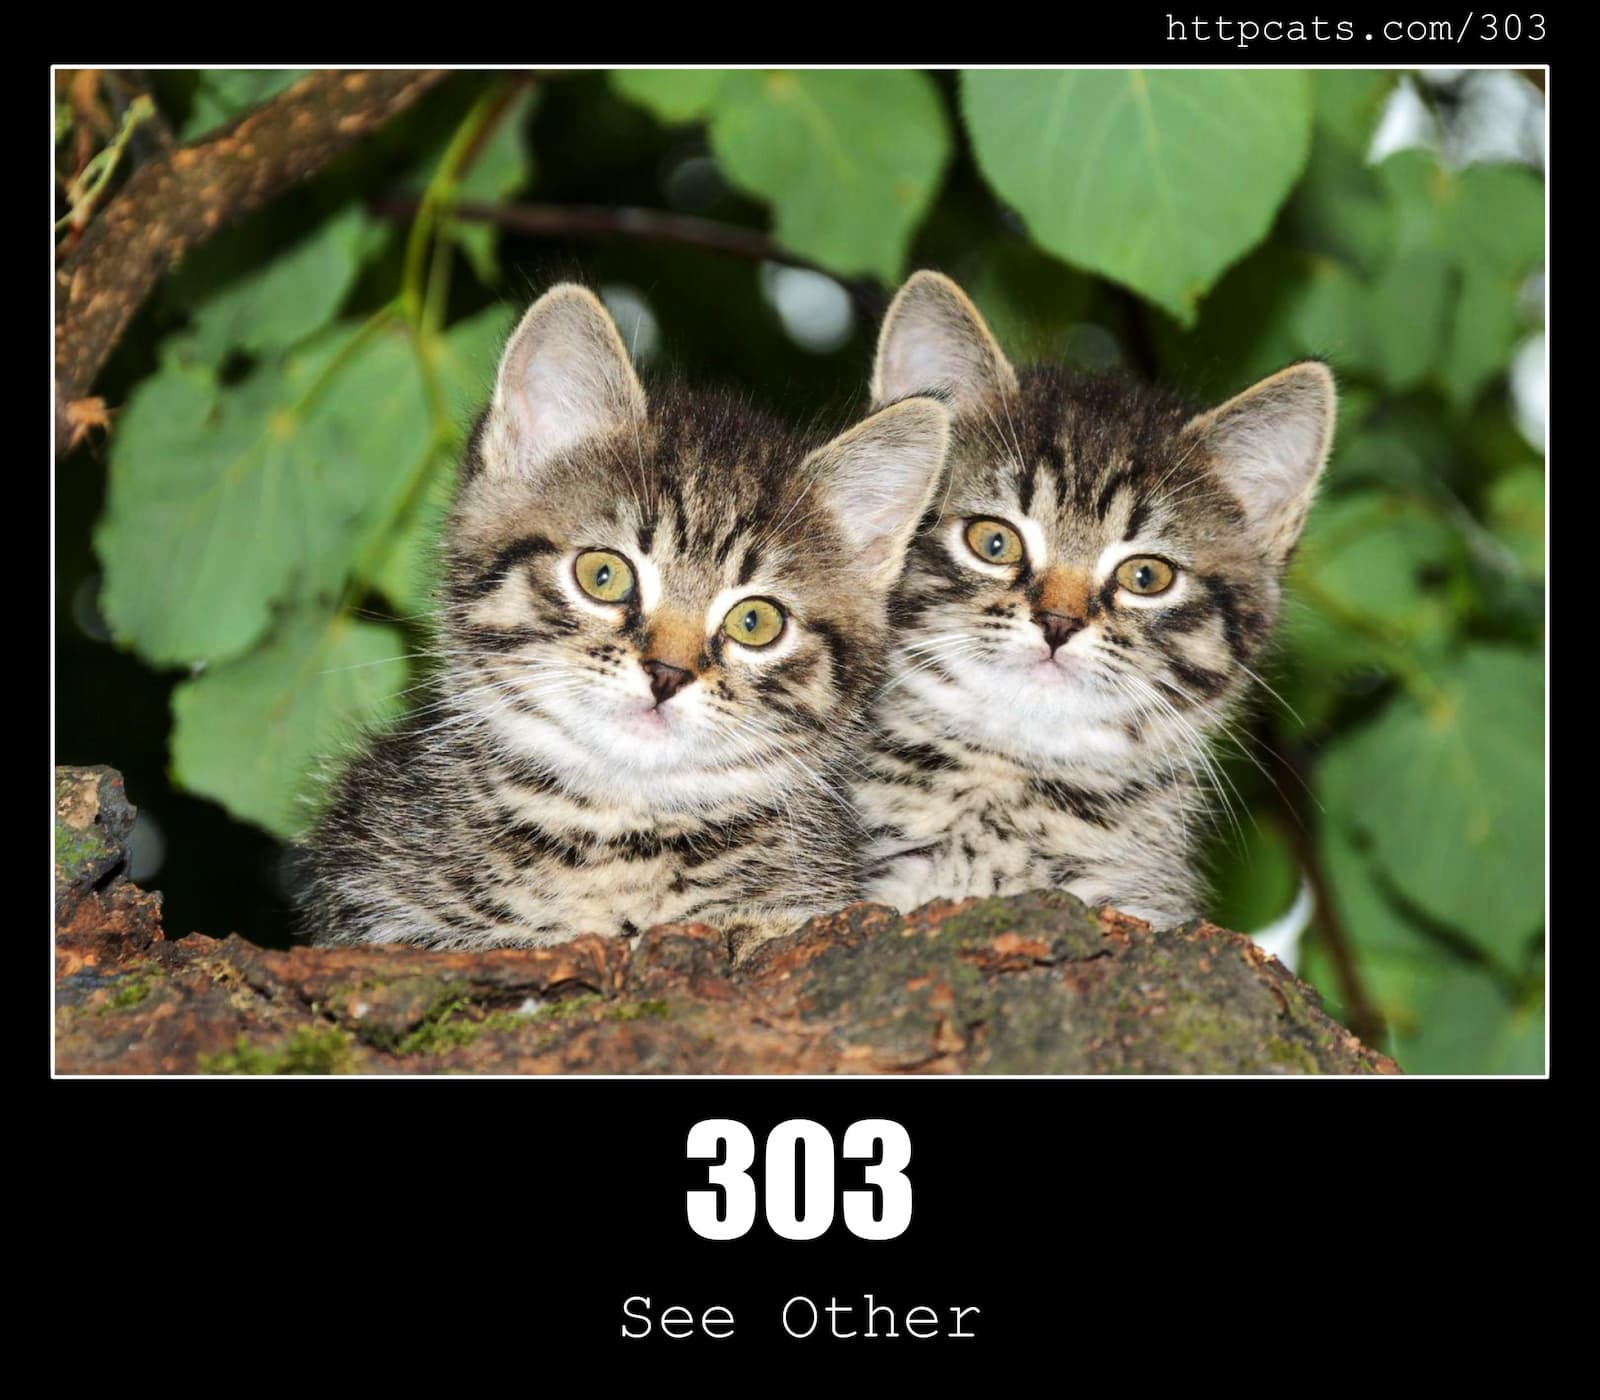 HTTP Status Code 303 See Other & Cats